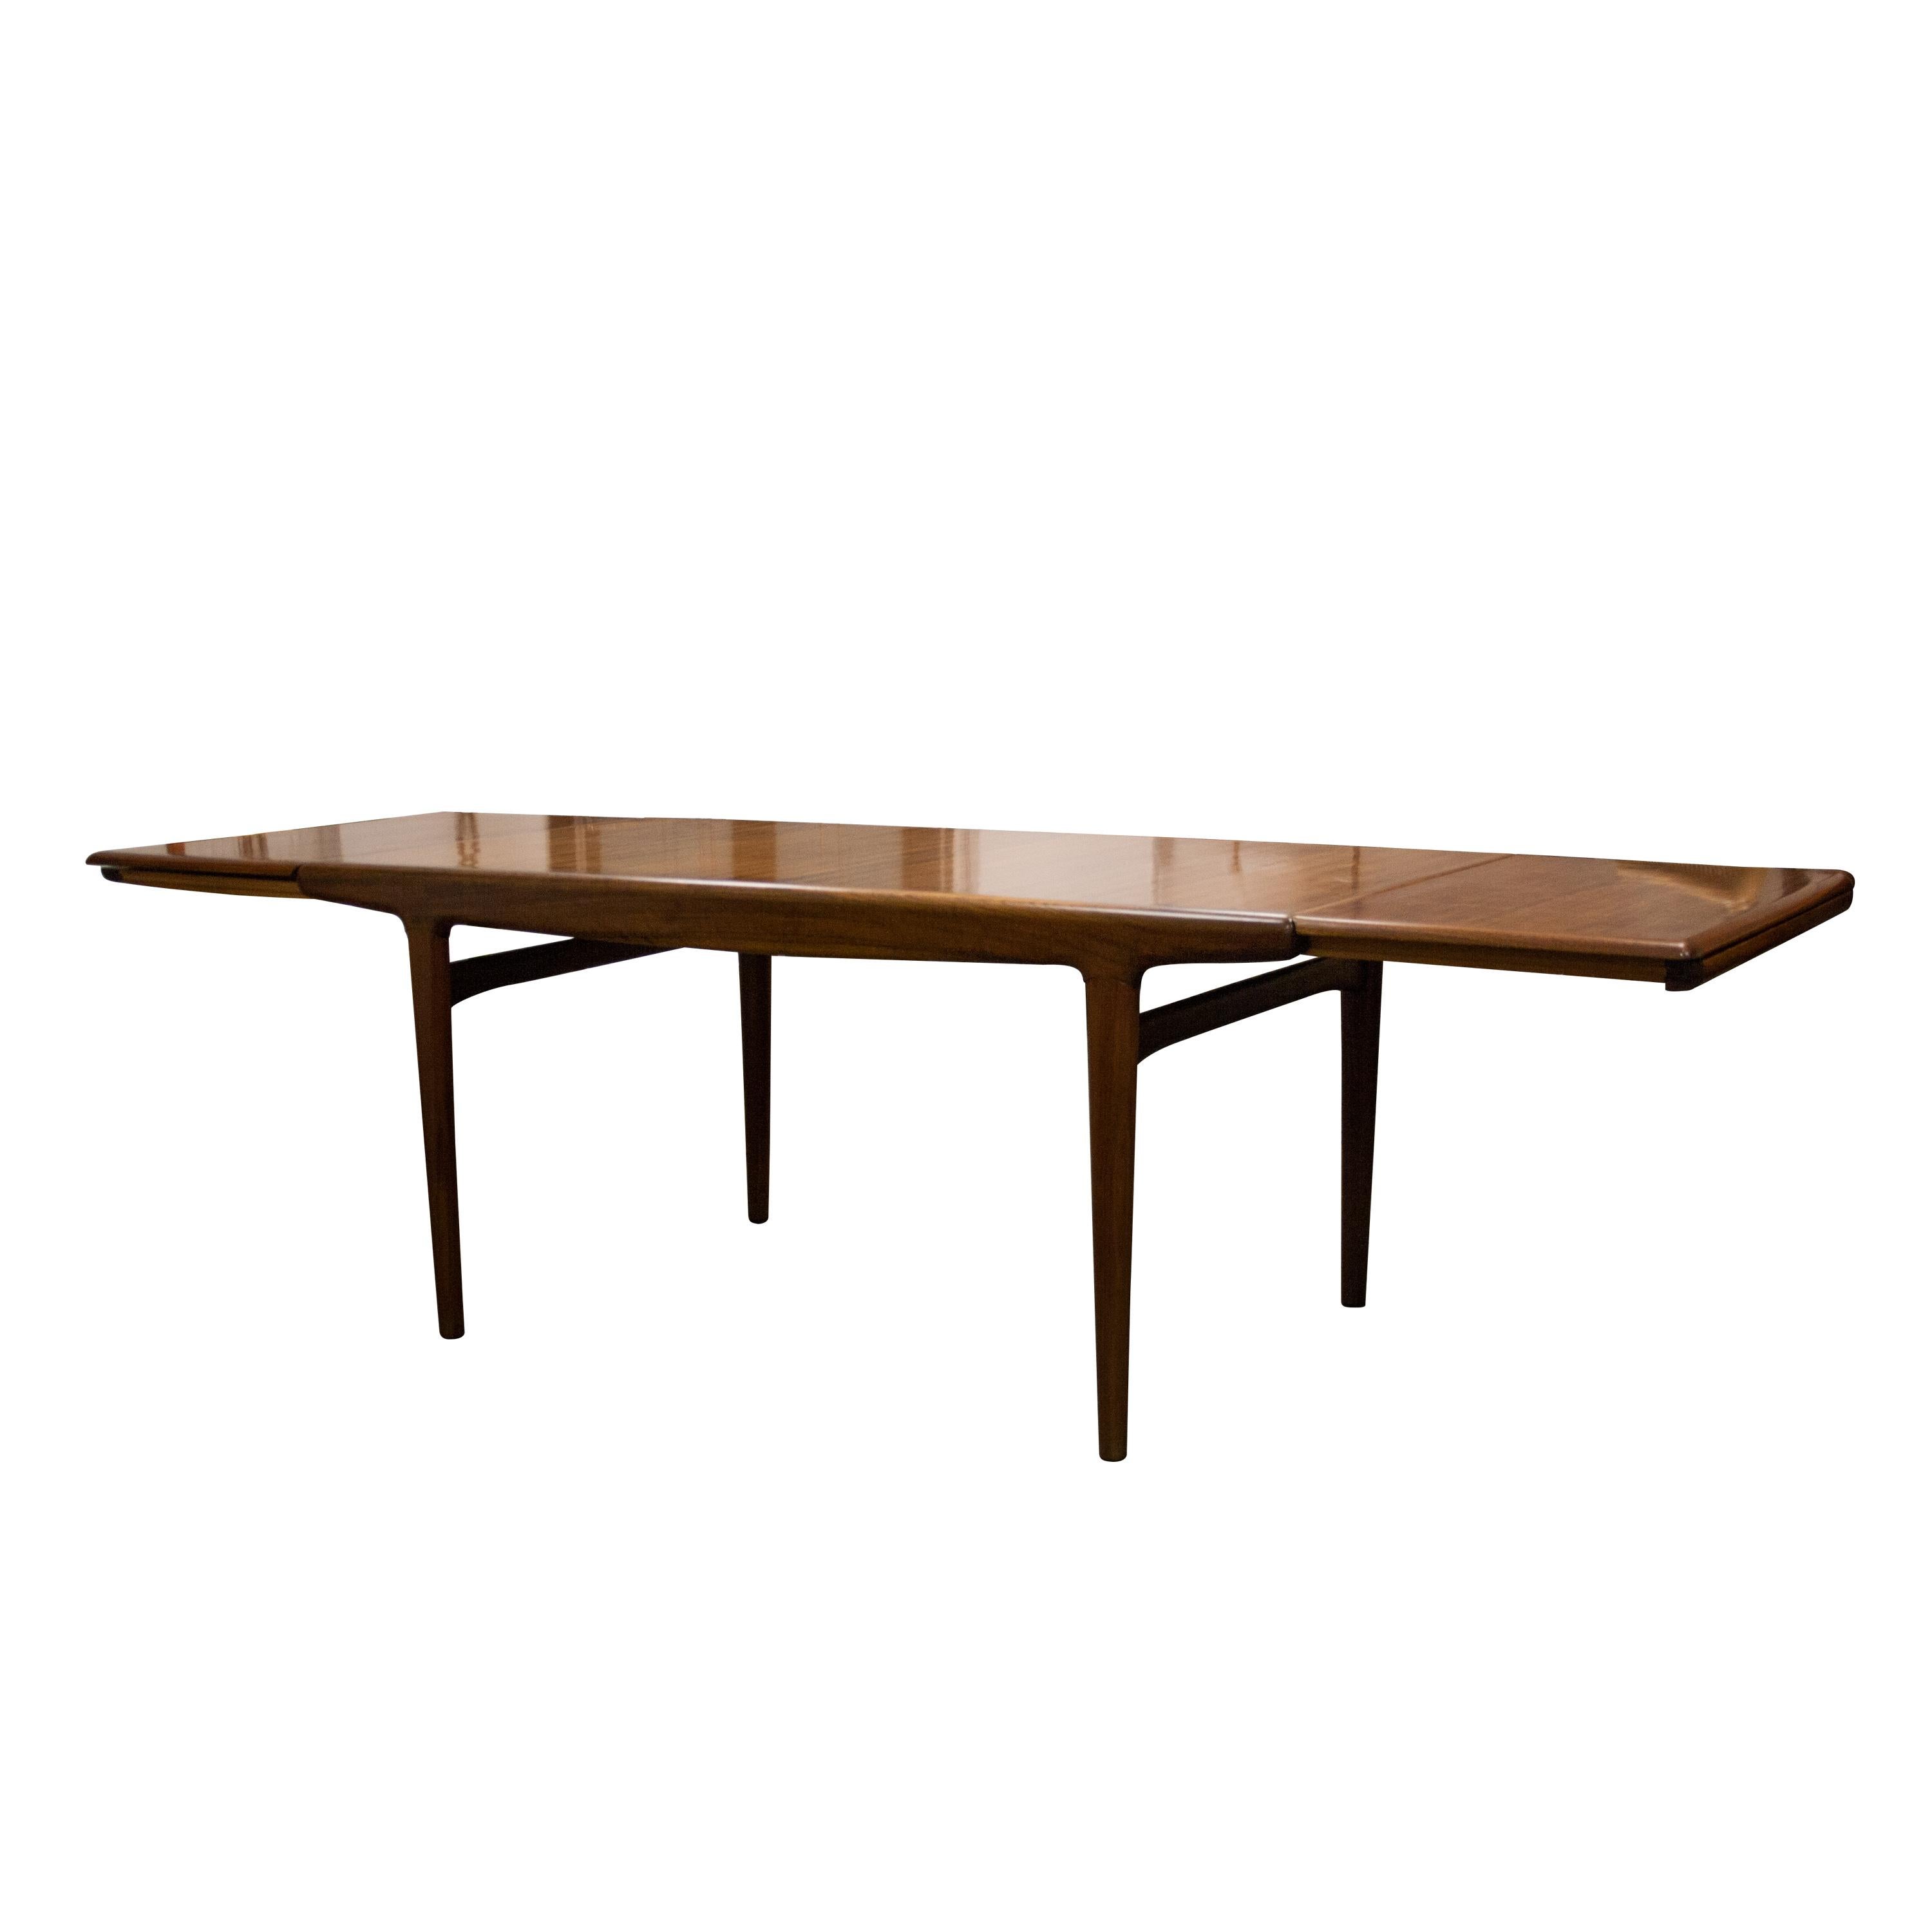 Mid-Century Danish teak extendable dining table designed by Arne Hovmand-Olsen for Mogens Kold in 1950´s. The table is compose of a central structure softly curved with a extendable leaf of 50cm at two of it´s sides.

Closed table measures: 170 x 90